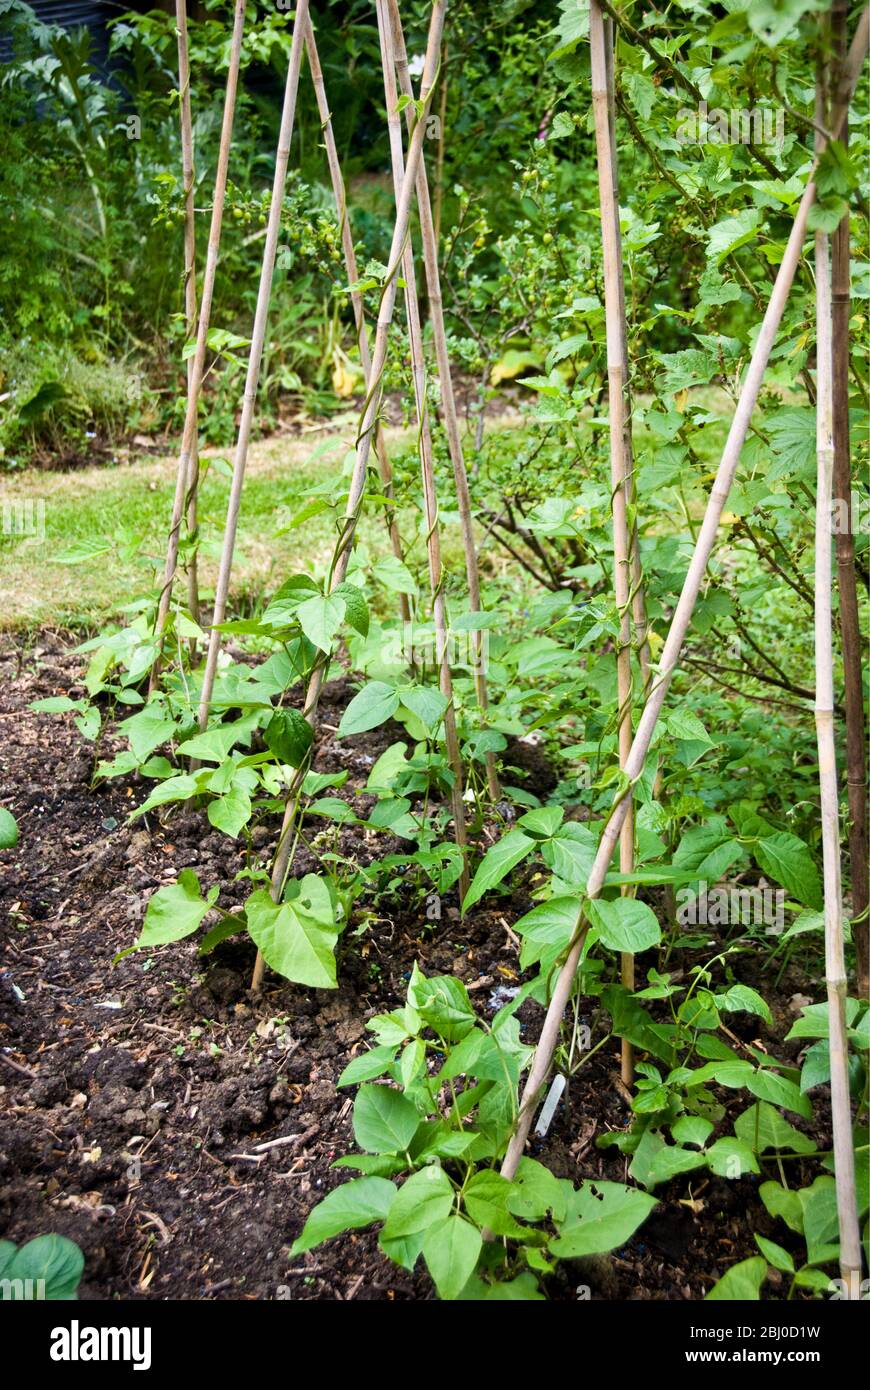 Young runner bean plants growing up bamboo canes in country garden vegetable plot - Stock Photo